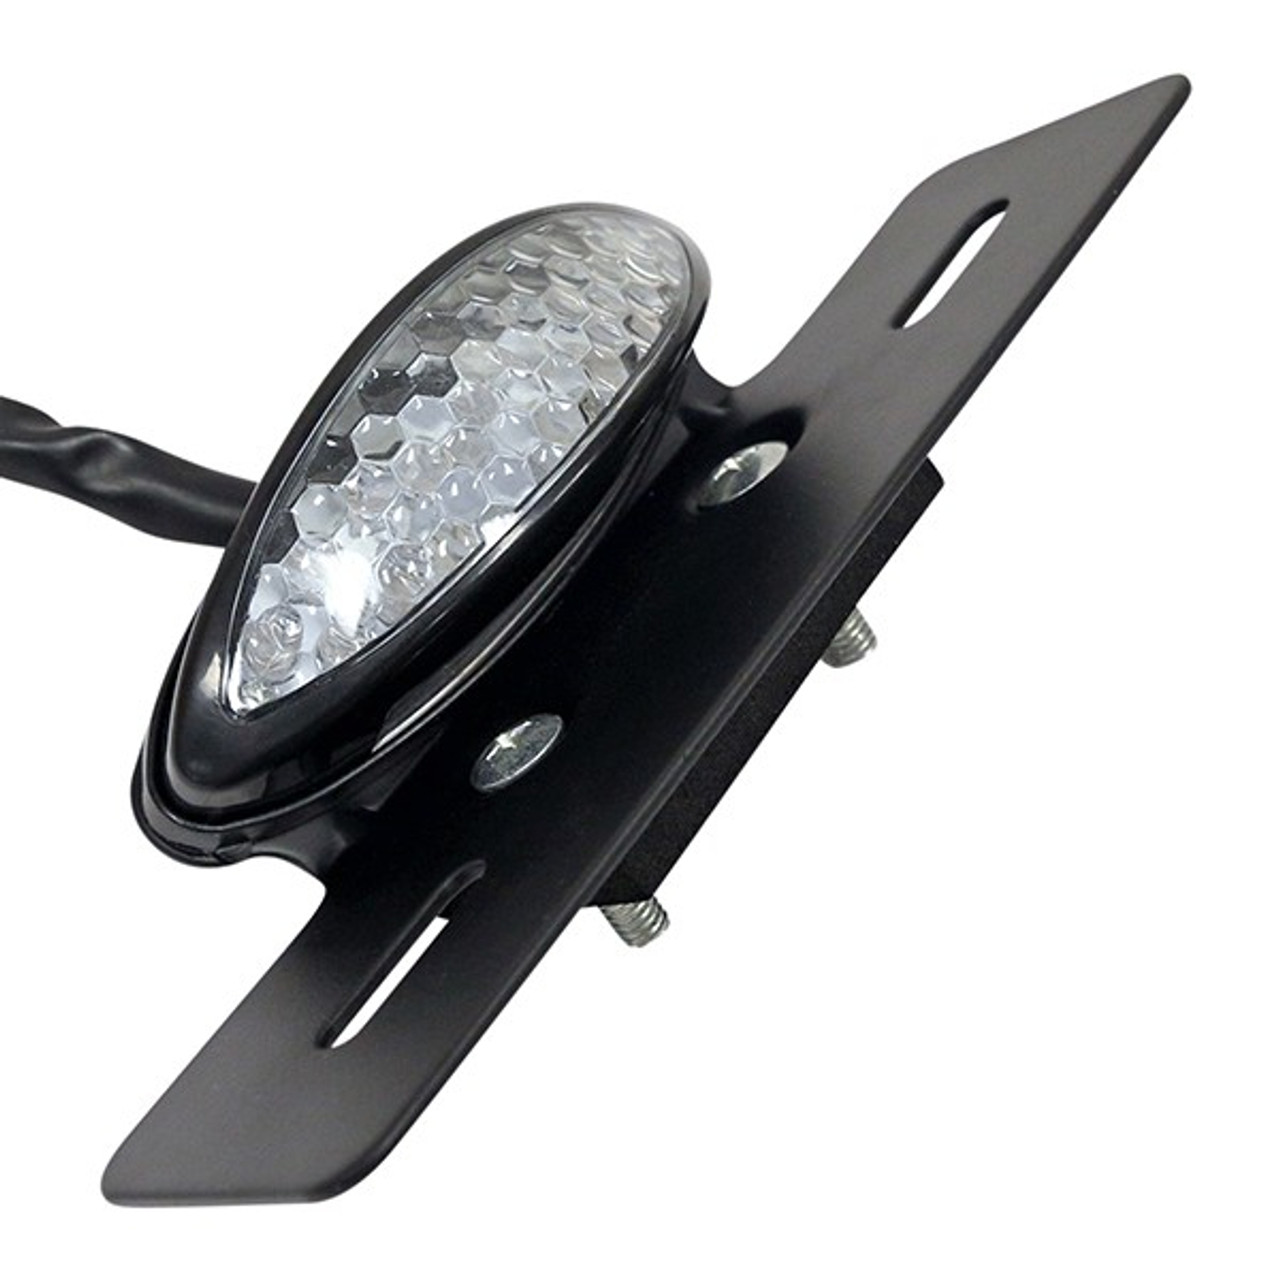 Illuminated License Plate Holder with LED Plate Tag for Universal Golf Cart, LGT-052